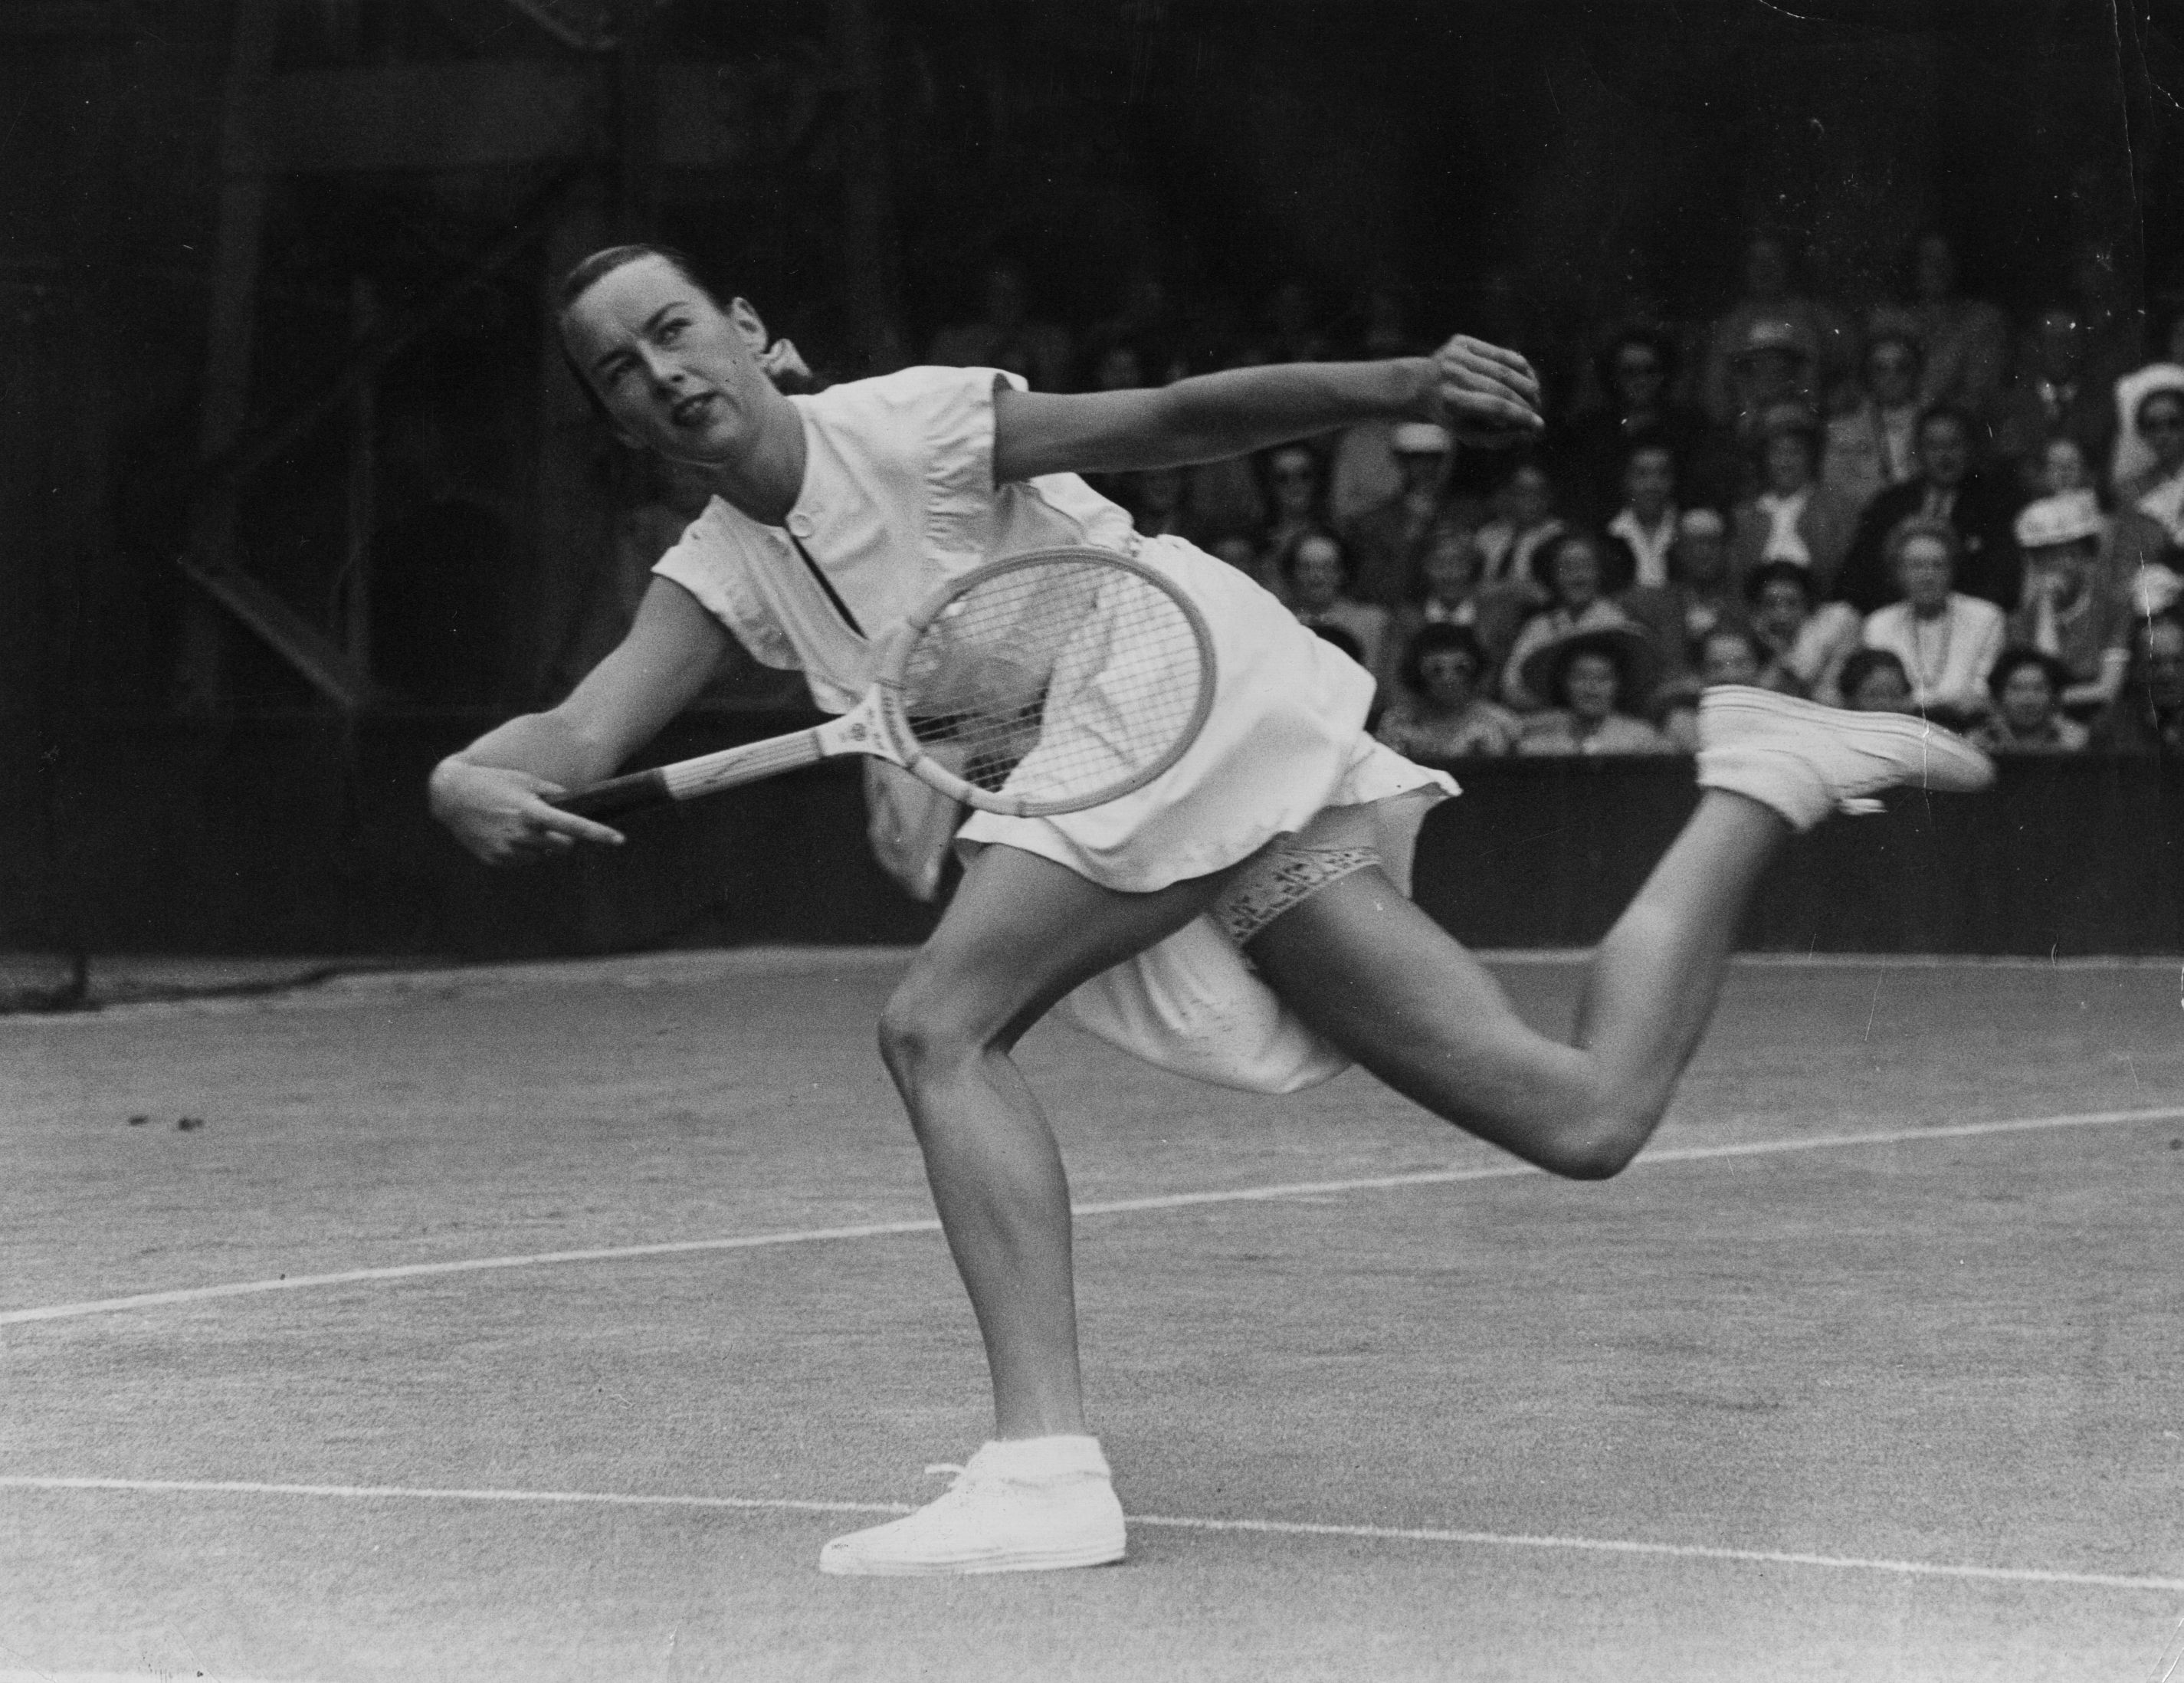 American tennis player Gertrude Moran, or Gorgeous Gussie, in action on her way to beating F M Wilford at Wimbledon on June 22, 1949. (George W. Hales—Getty Images)